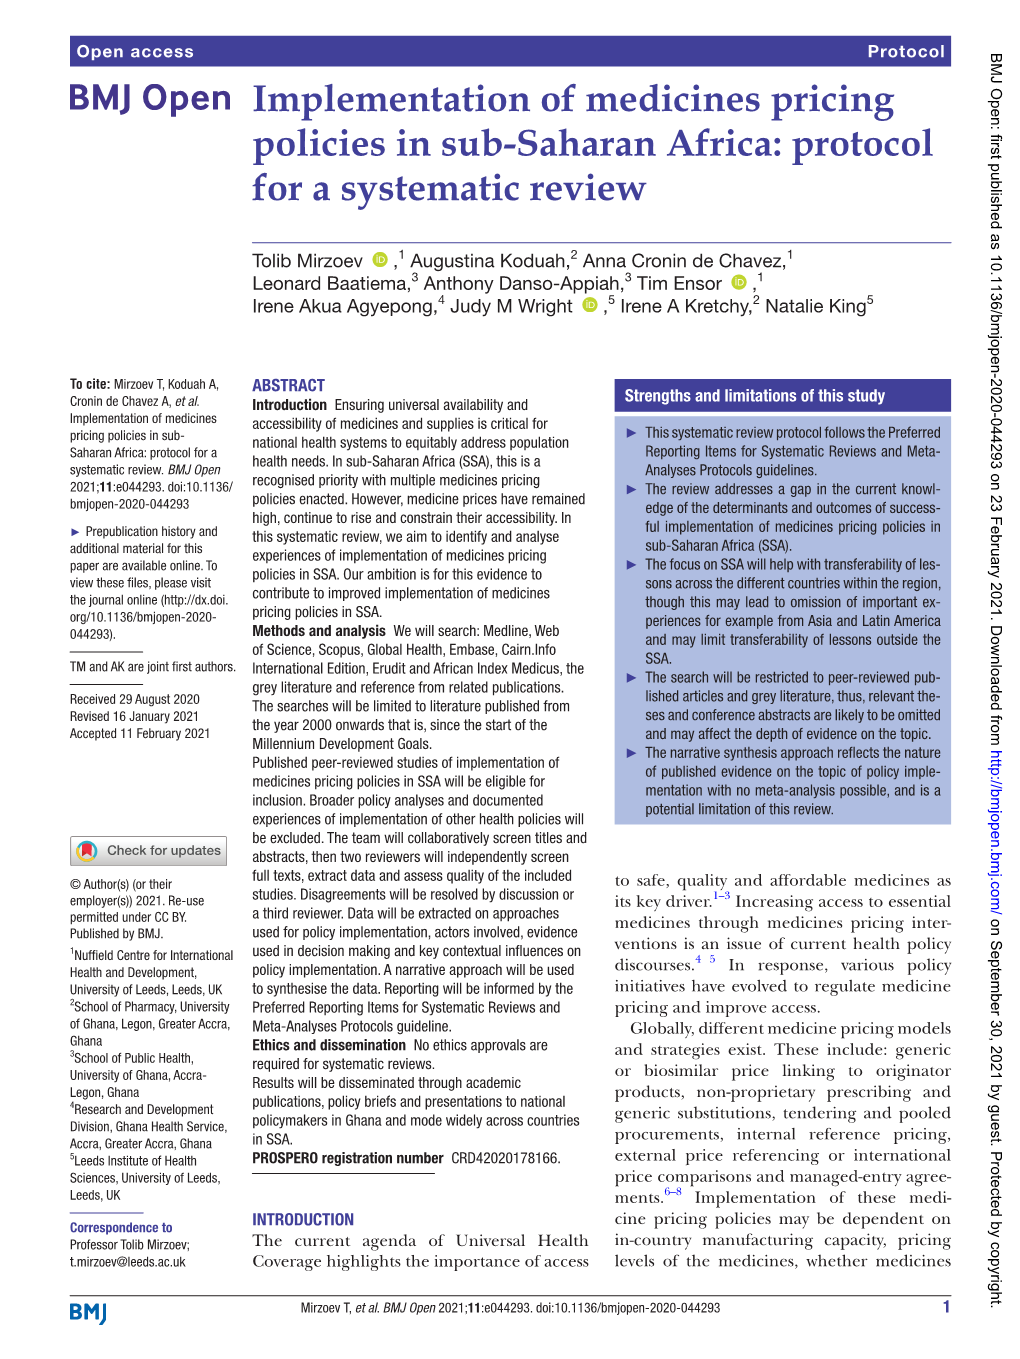 Protocol for a Systematic Review